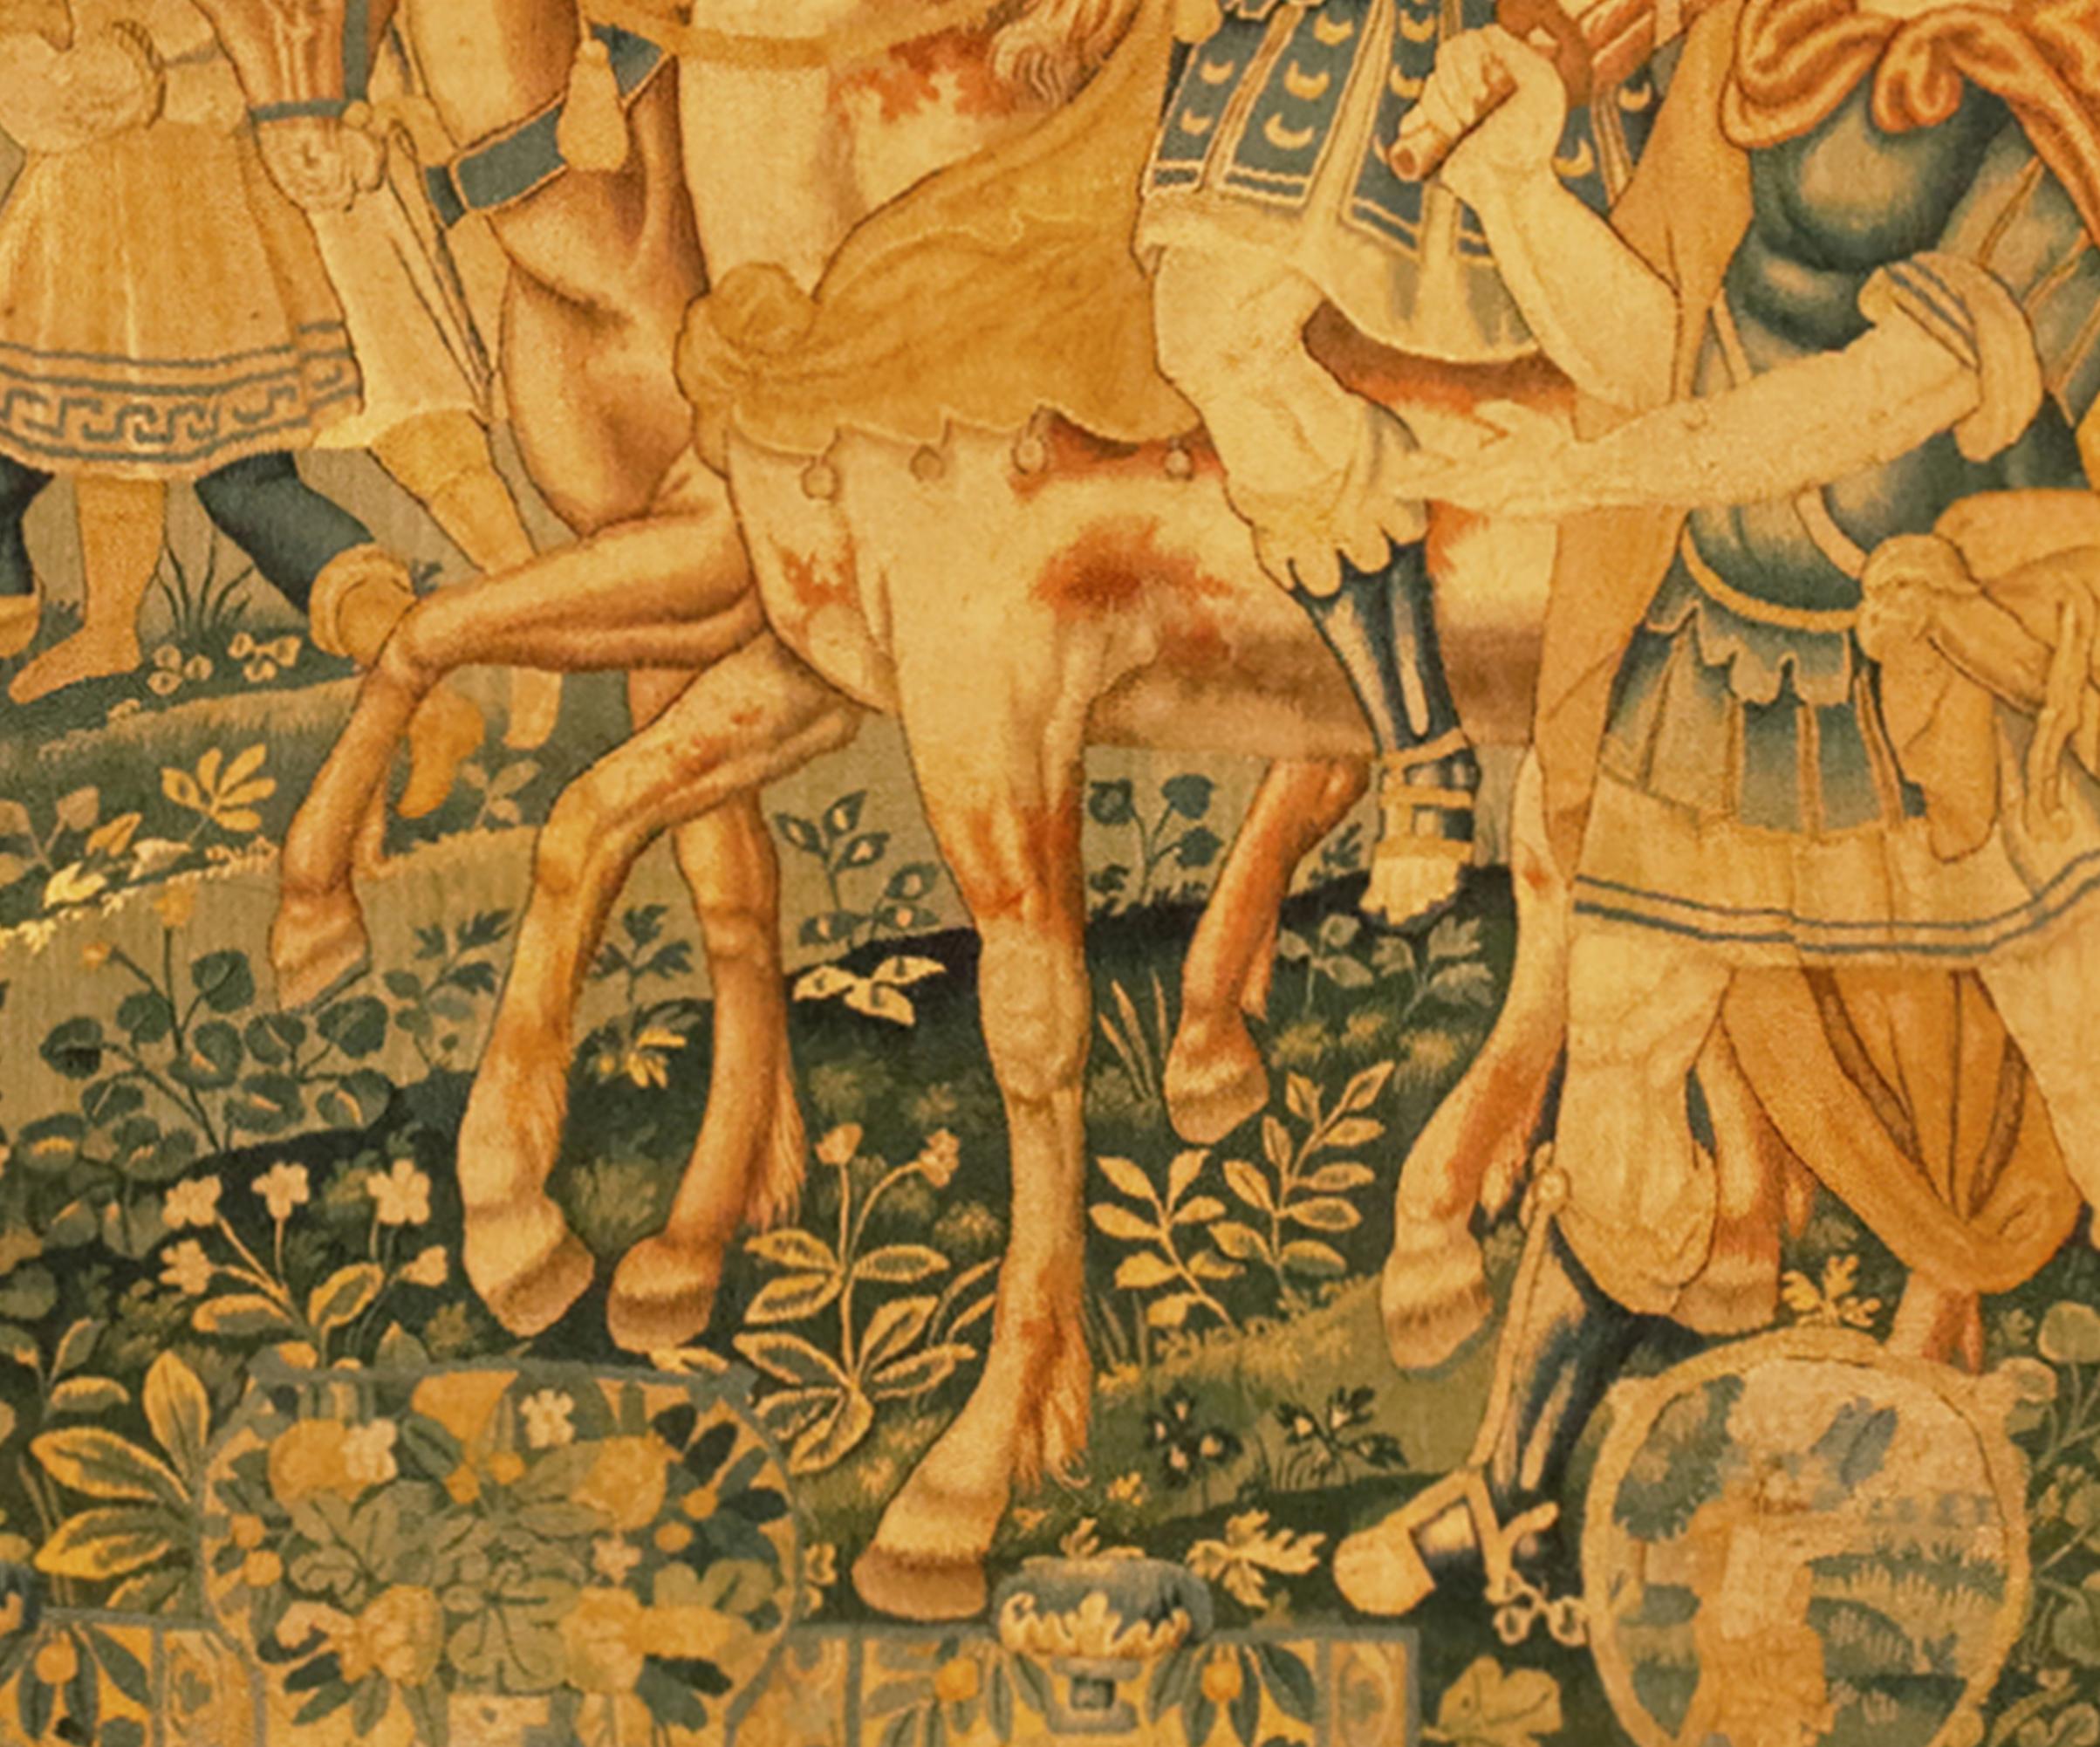 Hand-Woven 17th Century Flemish Historical Tapestry with the Roman General Coriolanus For Sale